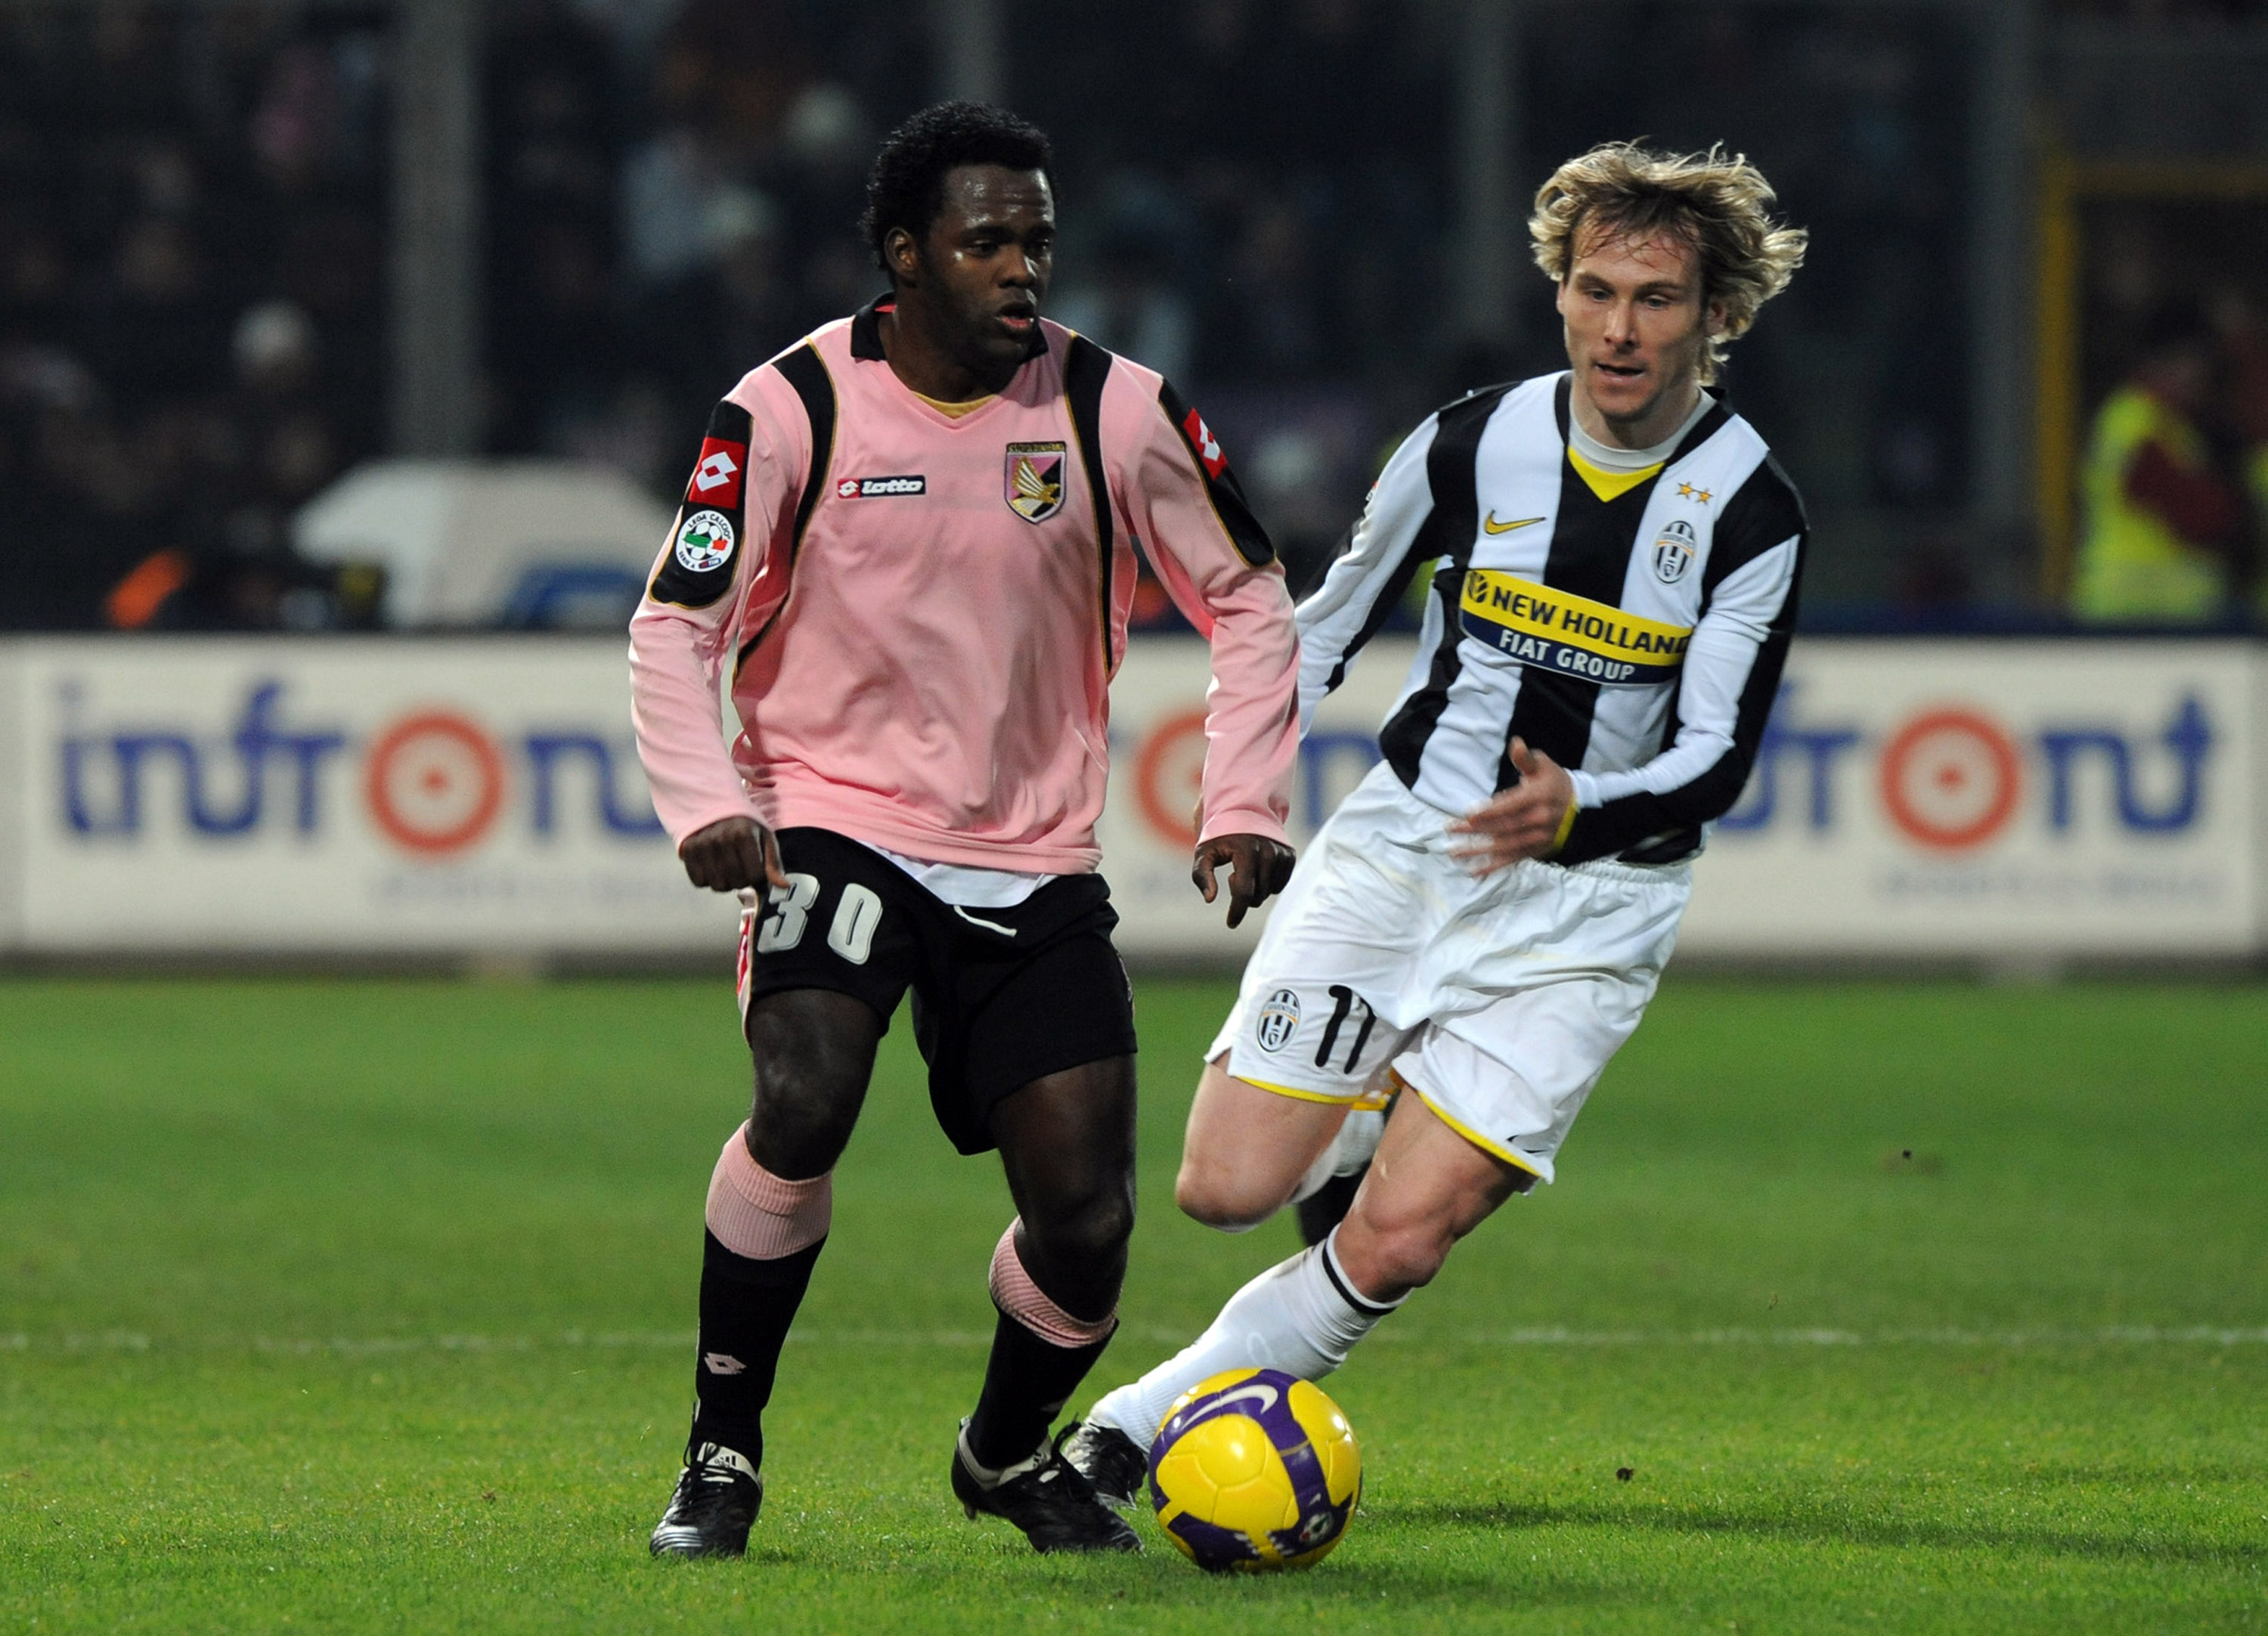 PALERMO, ITALY - FEBRUARY 21:  Fabio Simplicio of Palermo and  Pavel  Nedved of Juventus in action during the Serie A match between Palermo and Juventus at the Stadio Barbera  on February 21, 2009 in Palermo, Italy. (Photo by New Press/Getty Images)